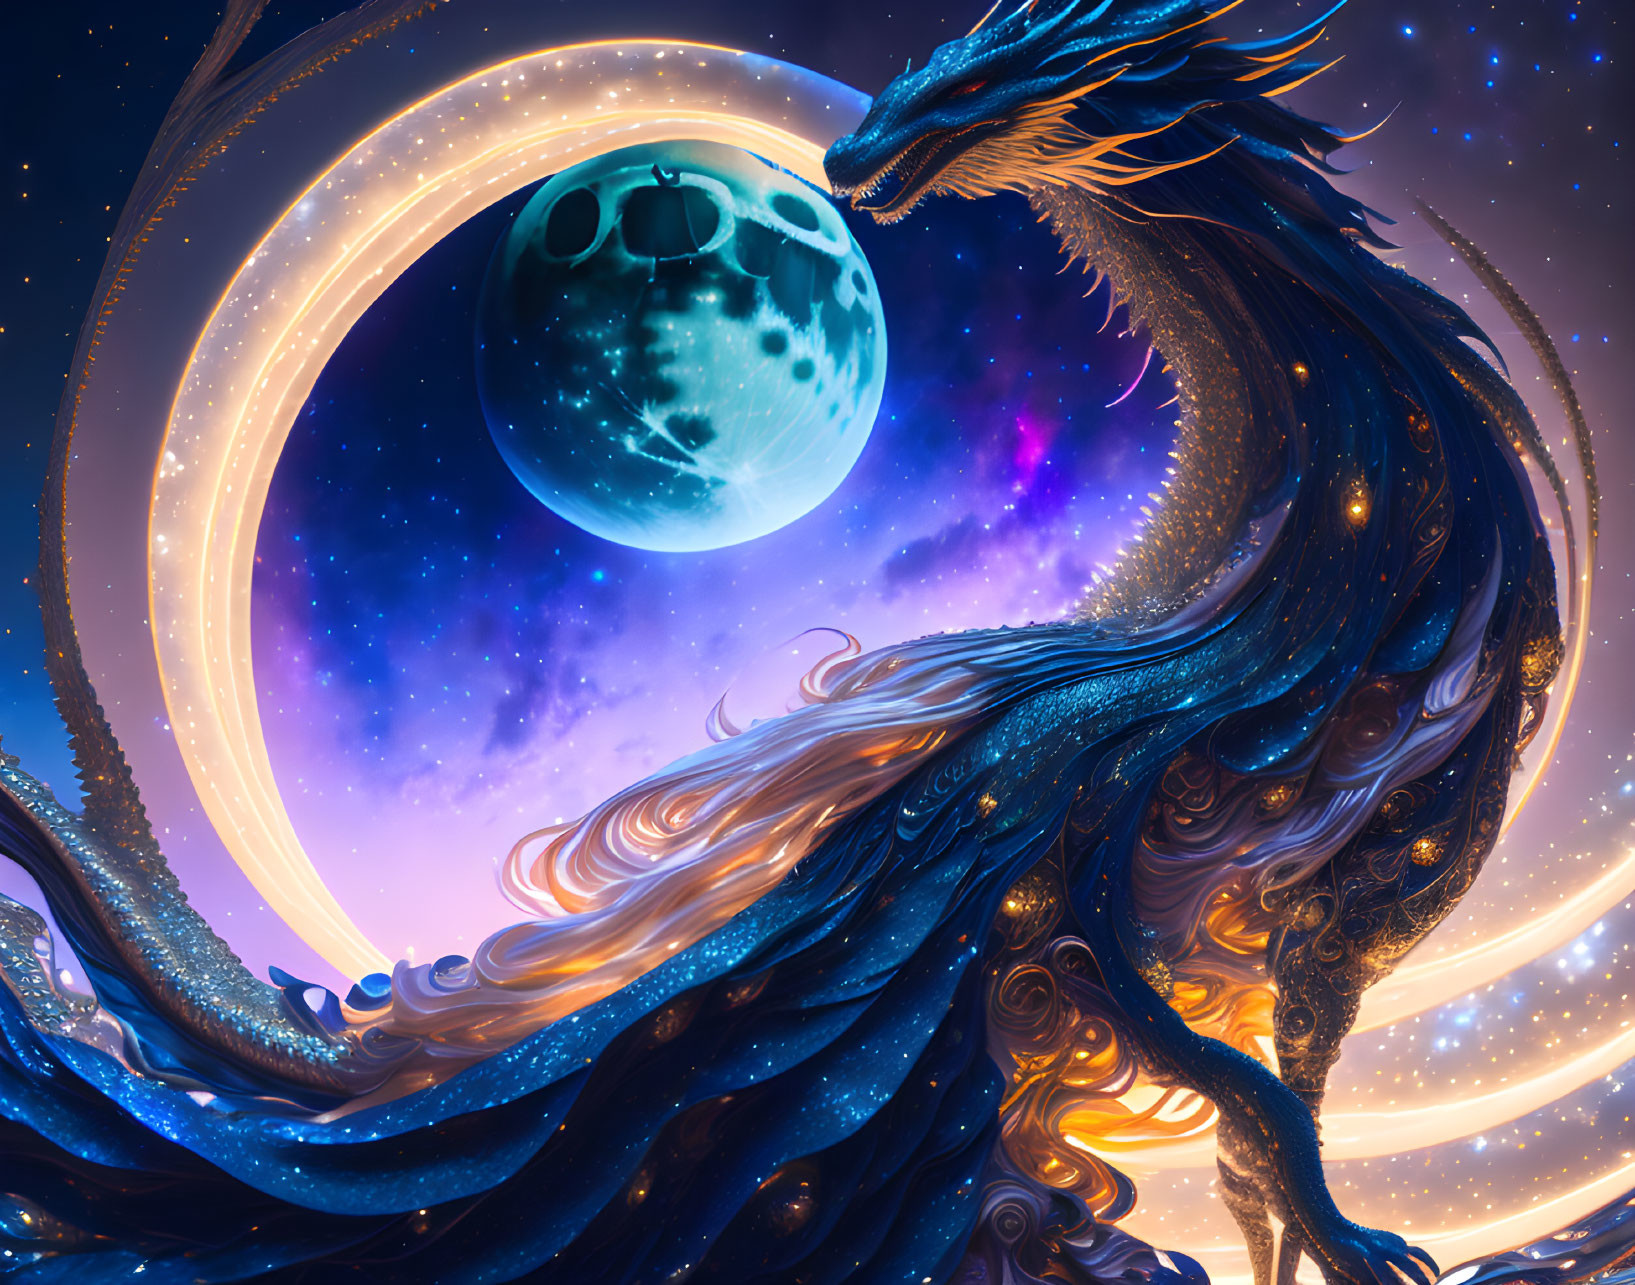 Blue dragon with golden accents in cosmic scene.